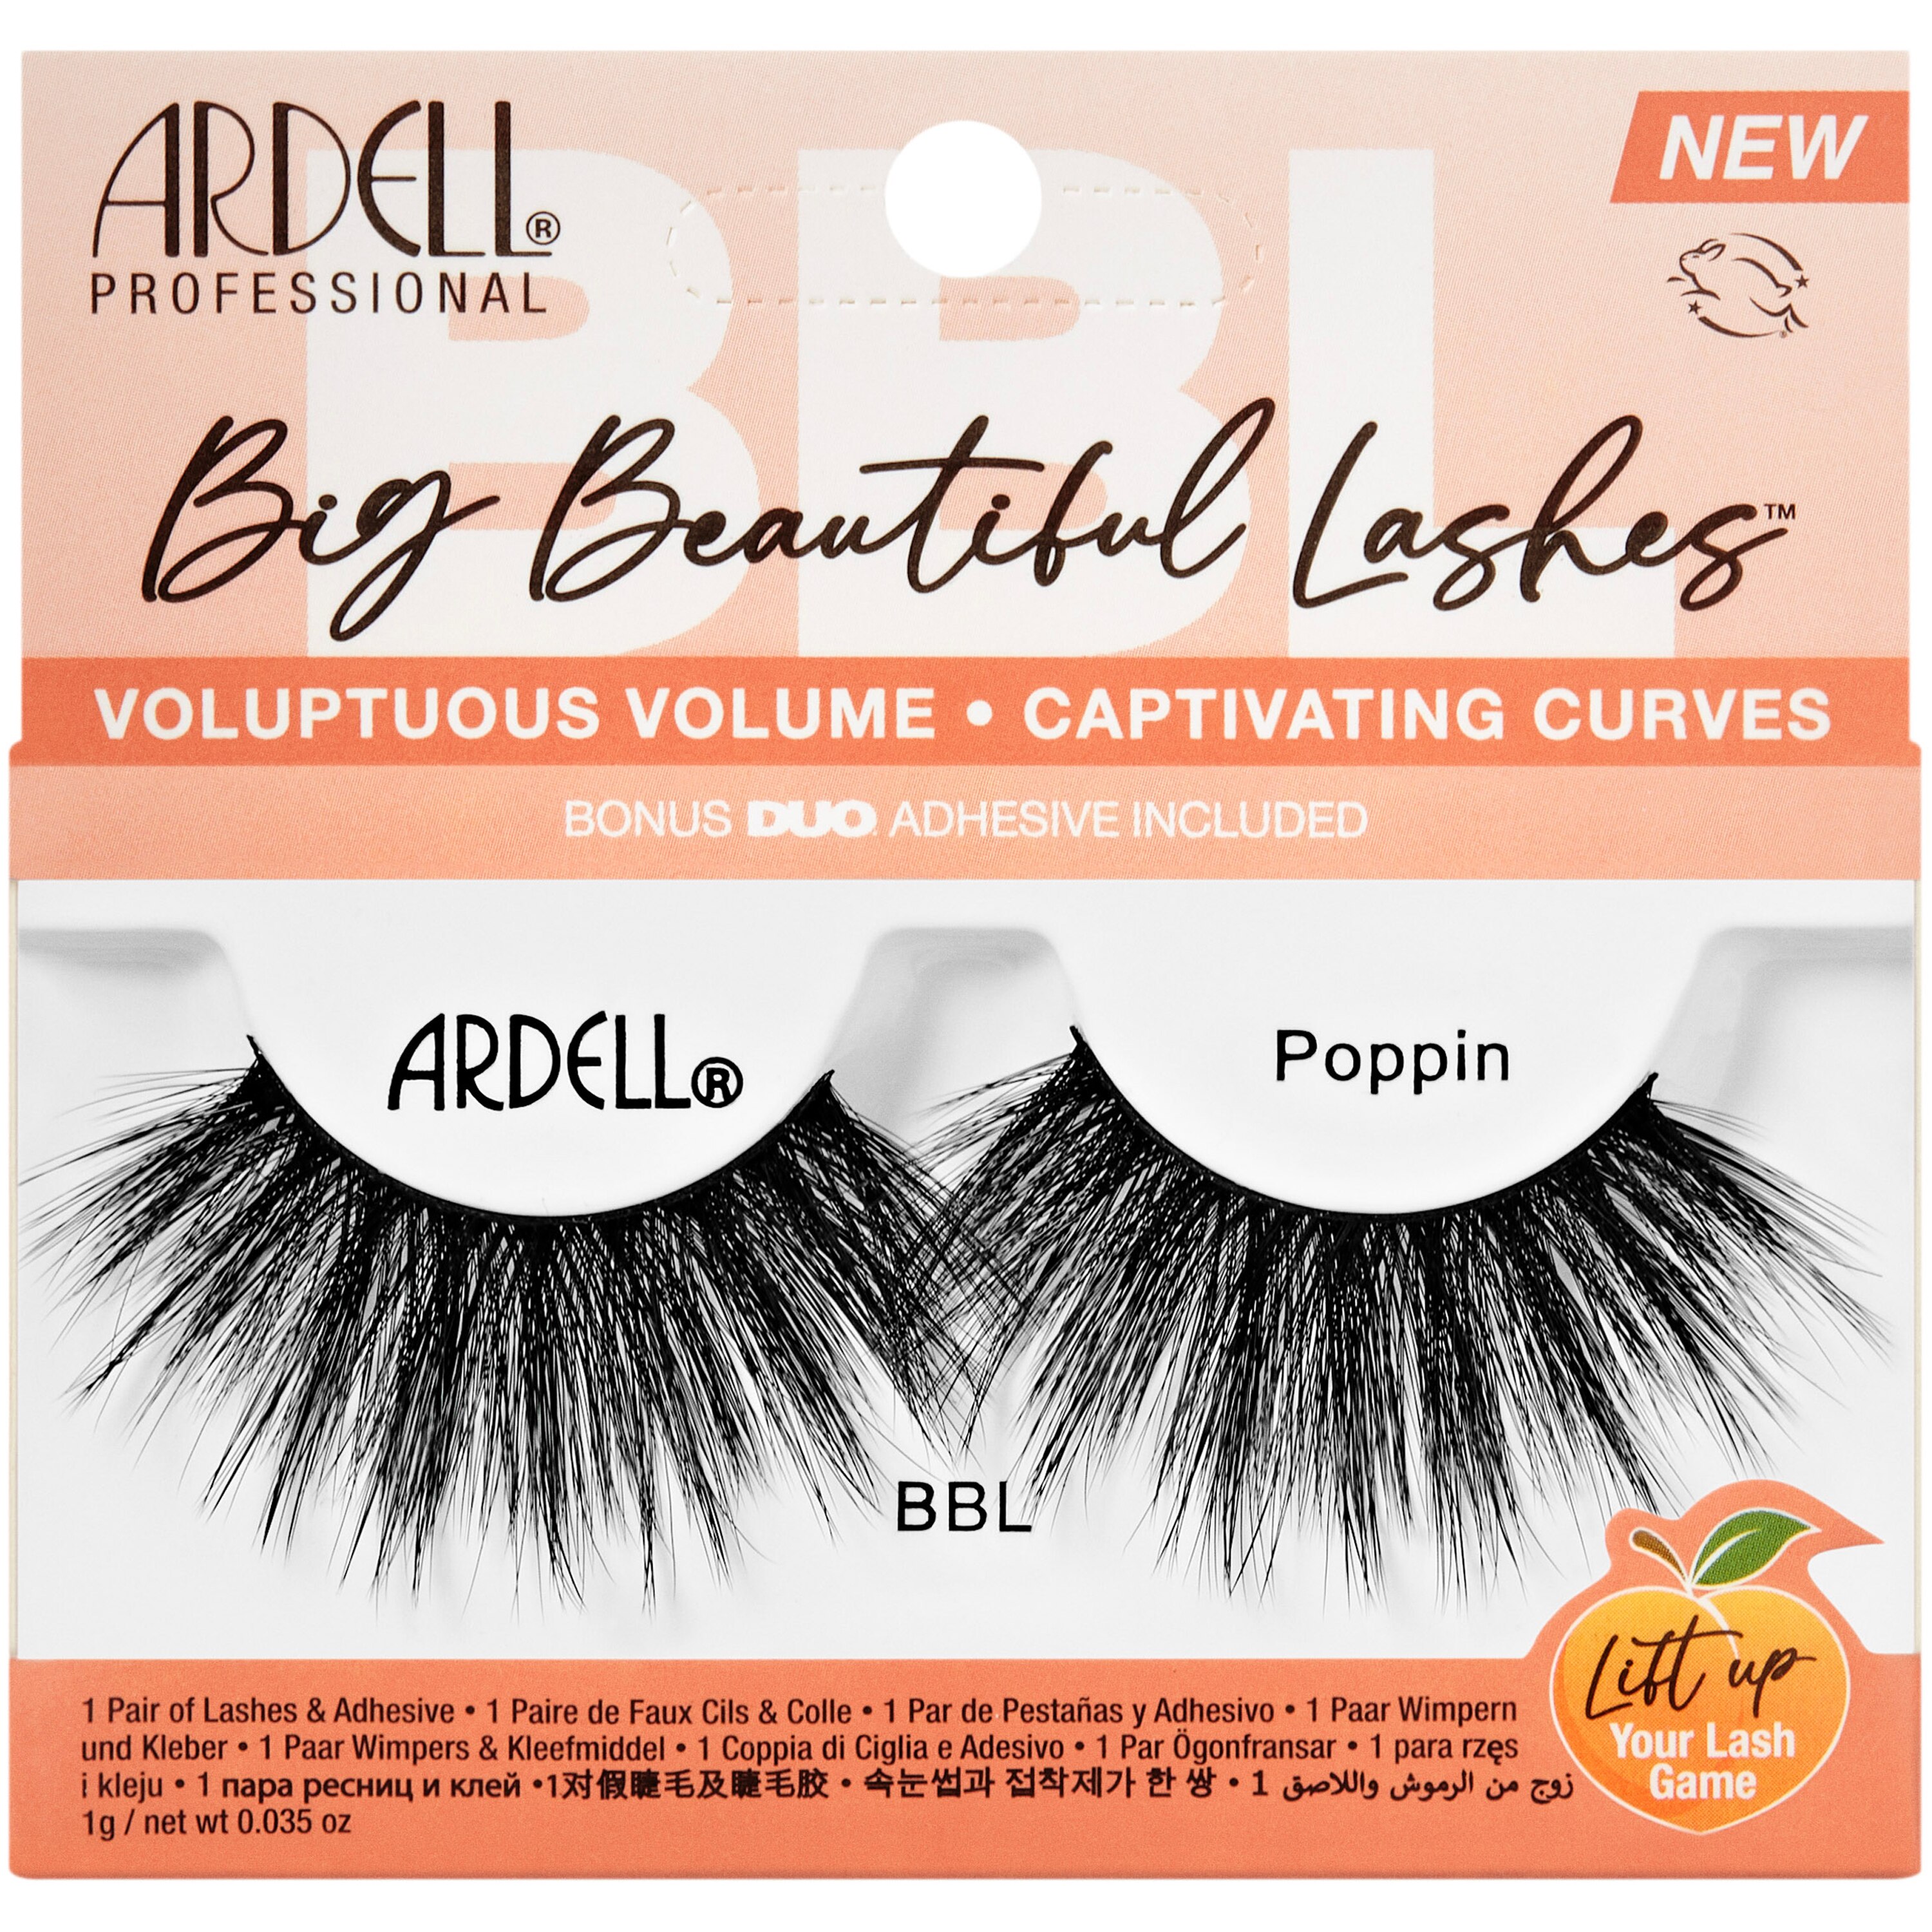 Ardell BBL Lashes